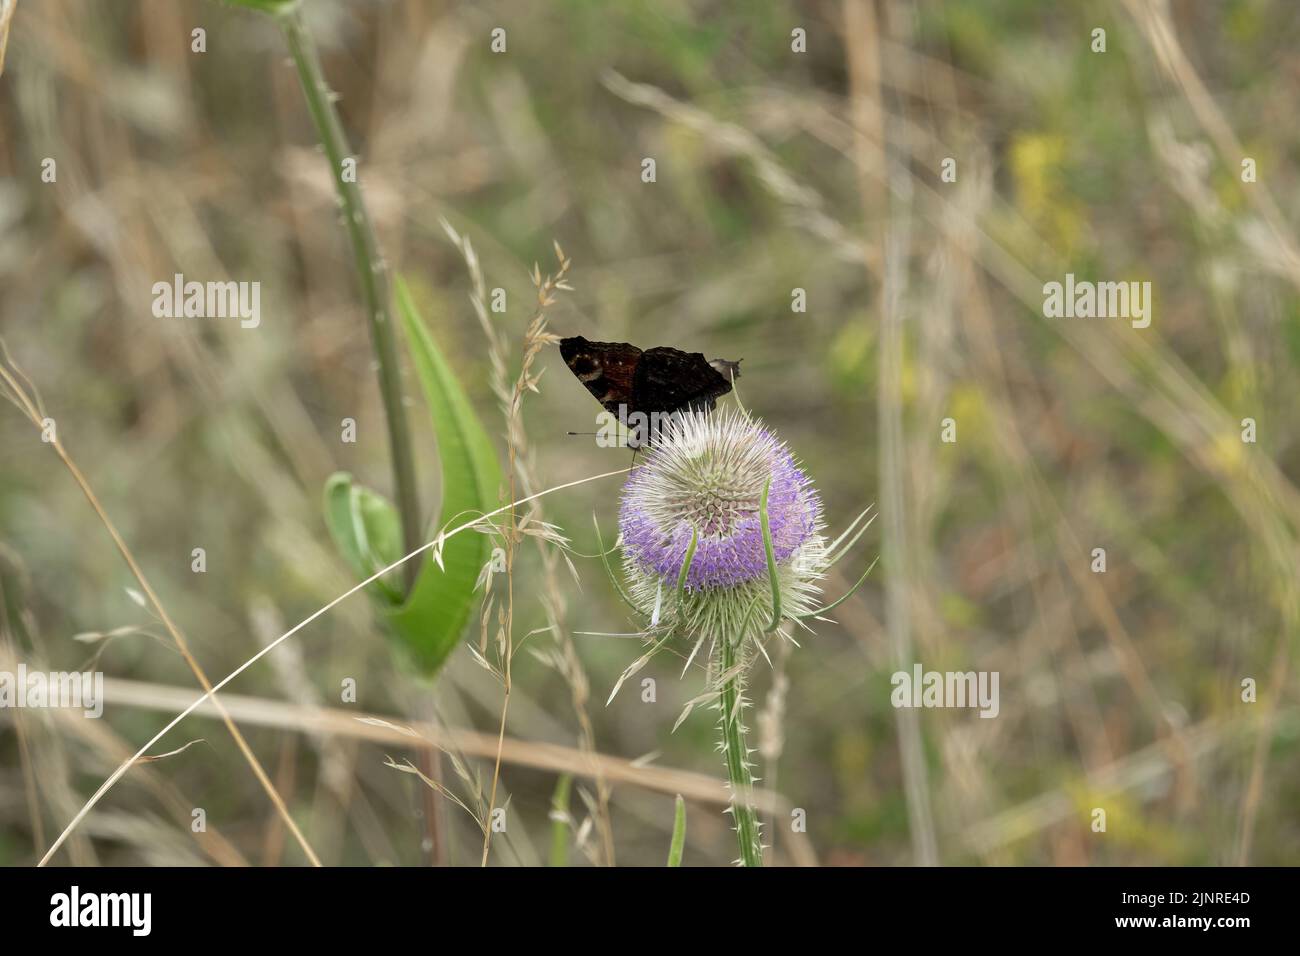 close-up of a Peacock butterfly (Inachis io) feeding on a Wild teasel (Dipsacus fullonum) Stock Photo